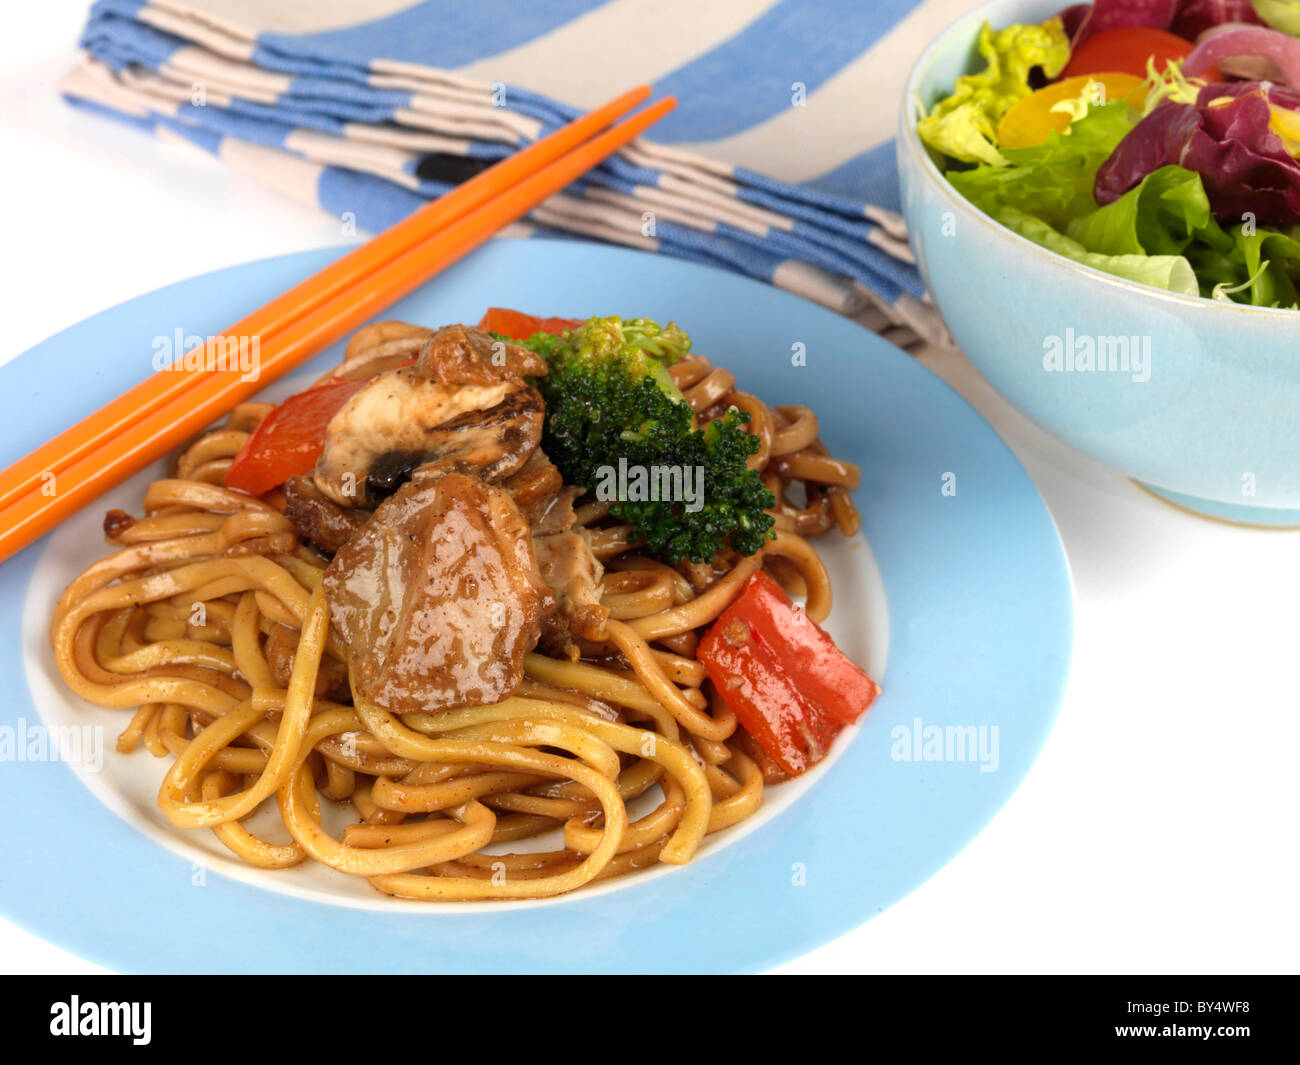 Freshly Cooked Stir Fried Chinese Char Sui Pork With Noodles Against A White Background With No People Stock Photo